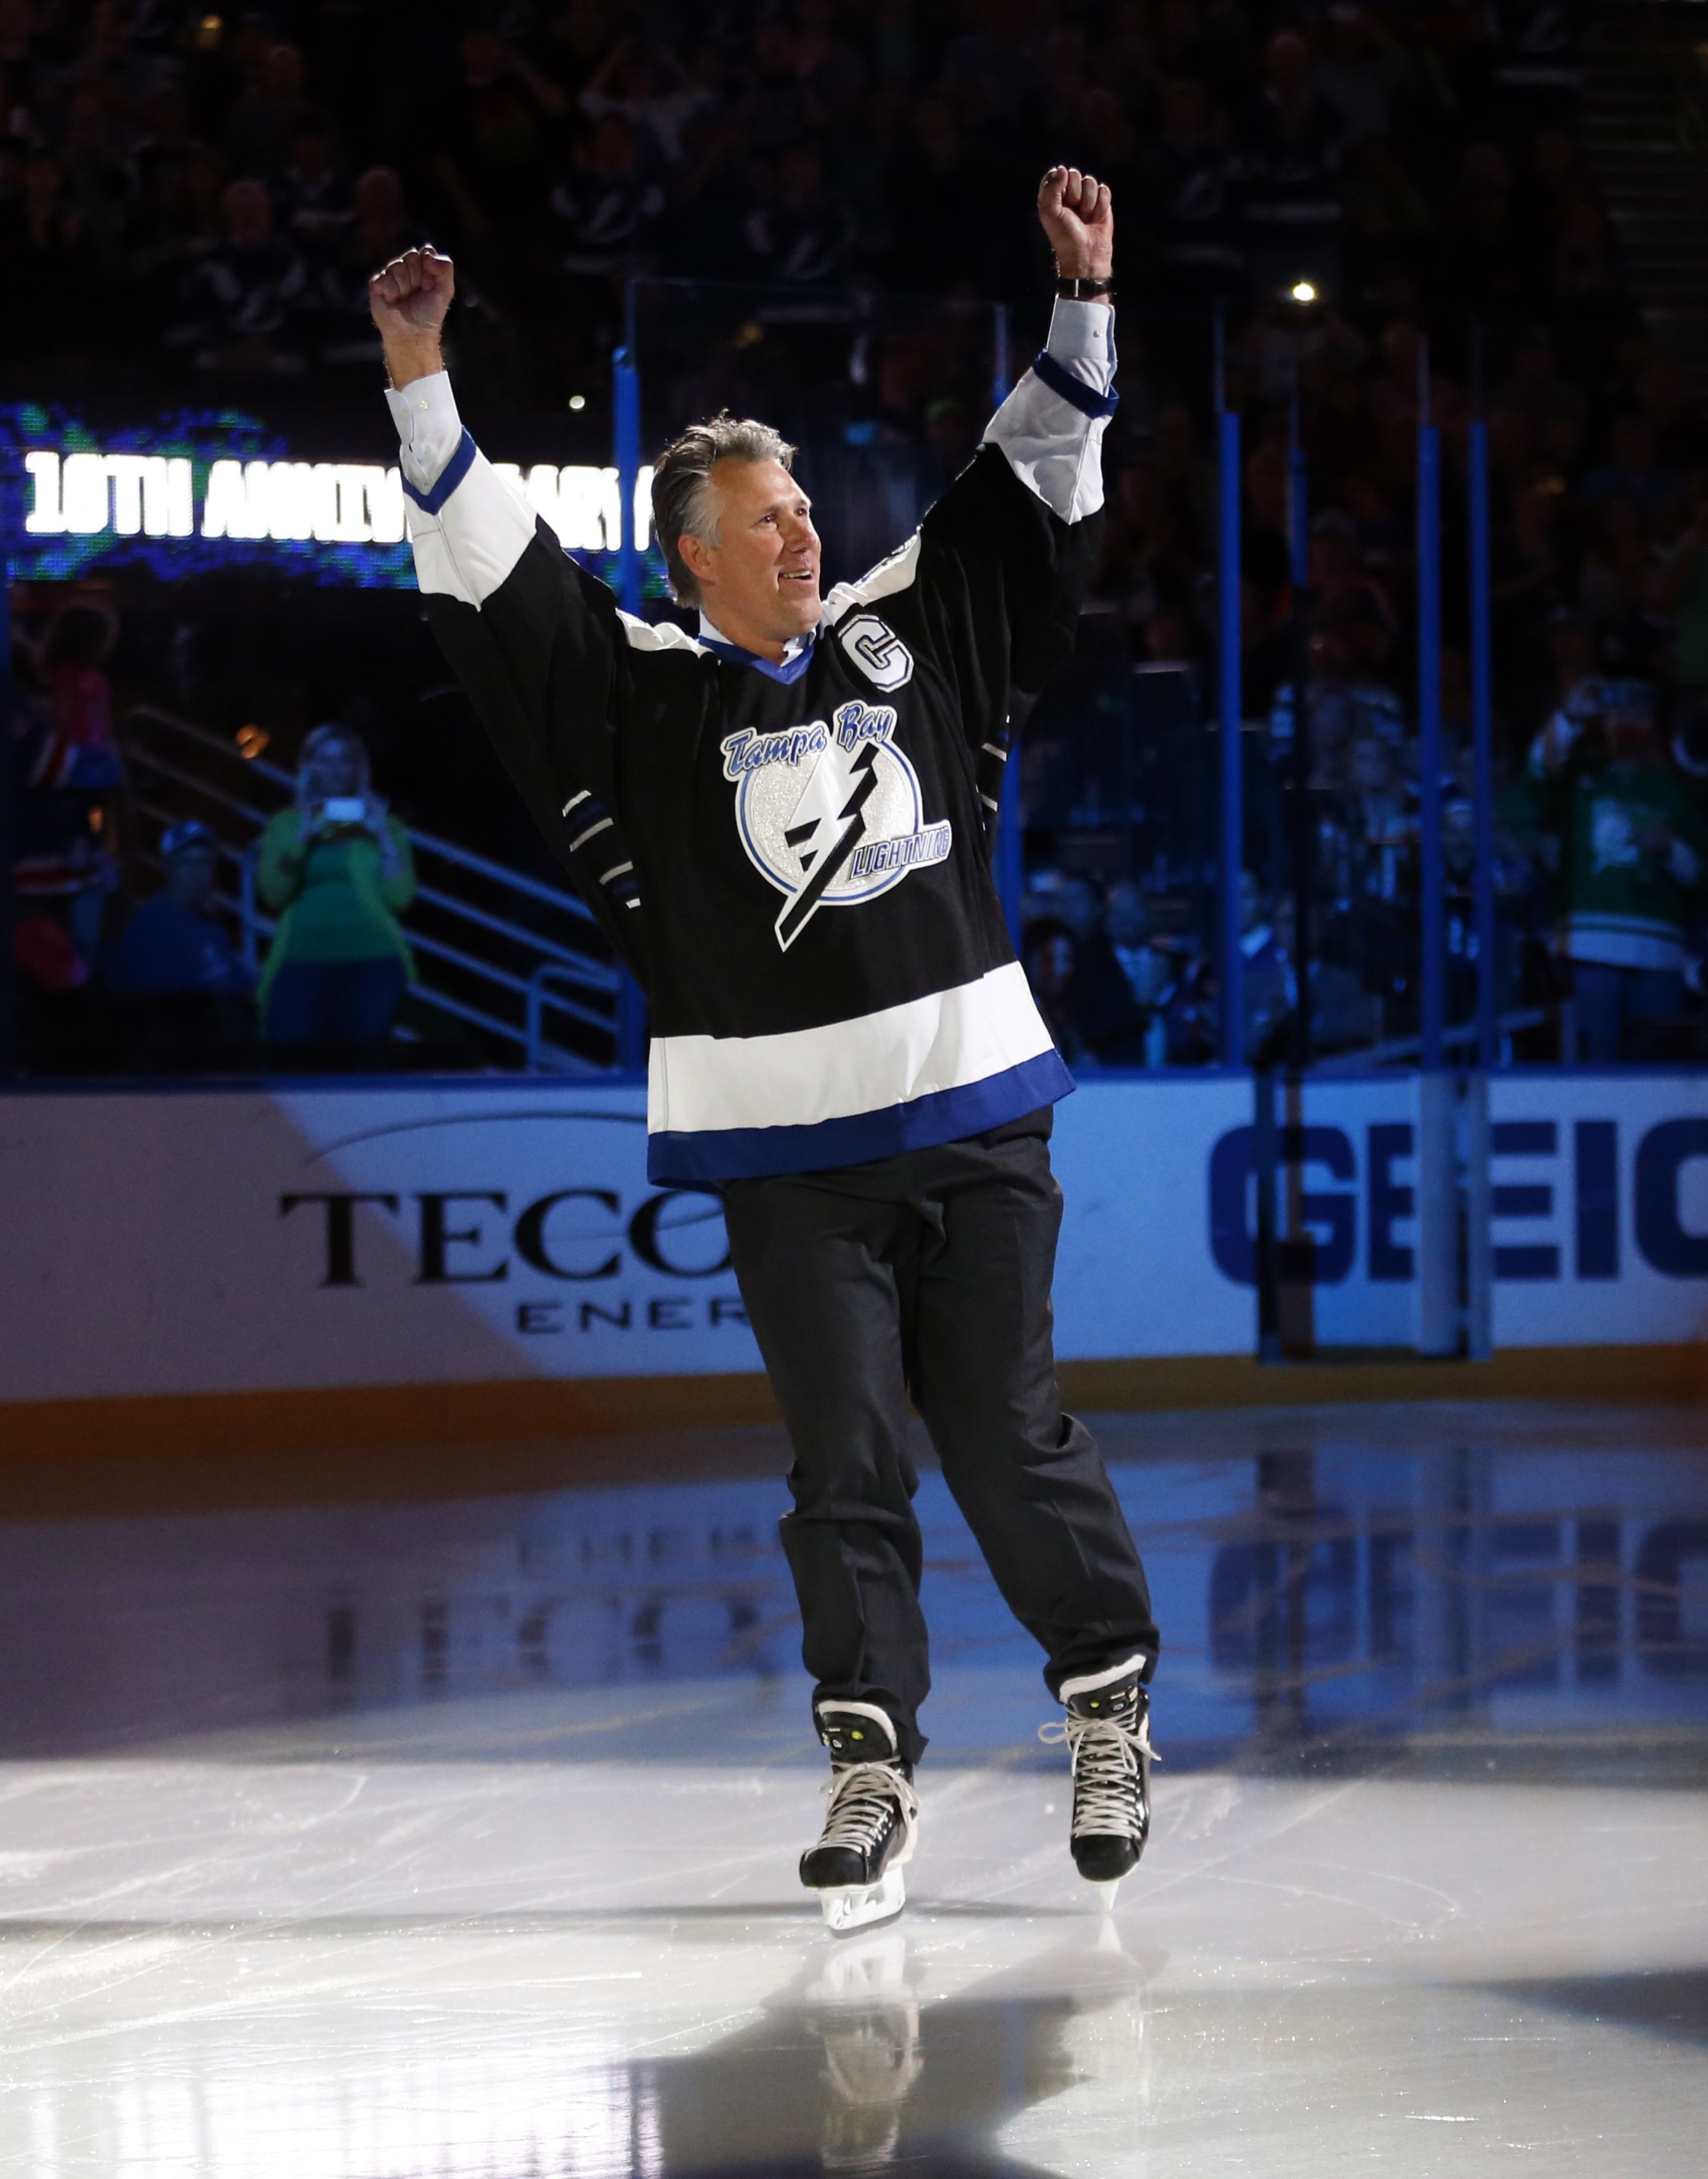 TAMPA, FL - MARCH 17: Dave Andreychuk, former captain of the Tampa Bay Lightning, is introduced as part of the team's celebration of the tenth anniversary of their Stanley Cup win prior to a game against the Vancouver Canucks at the Tampa Bay Times Forum on March 17, 2014 in Tampa, Florida. (Photo by Mike Carlson/Getty Images)